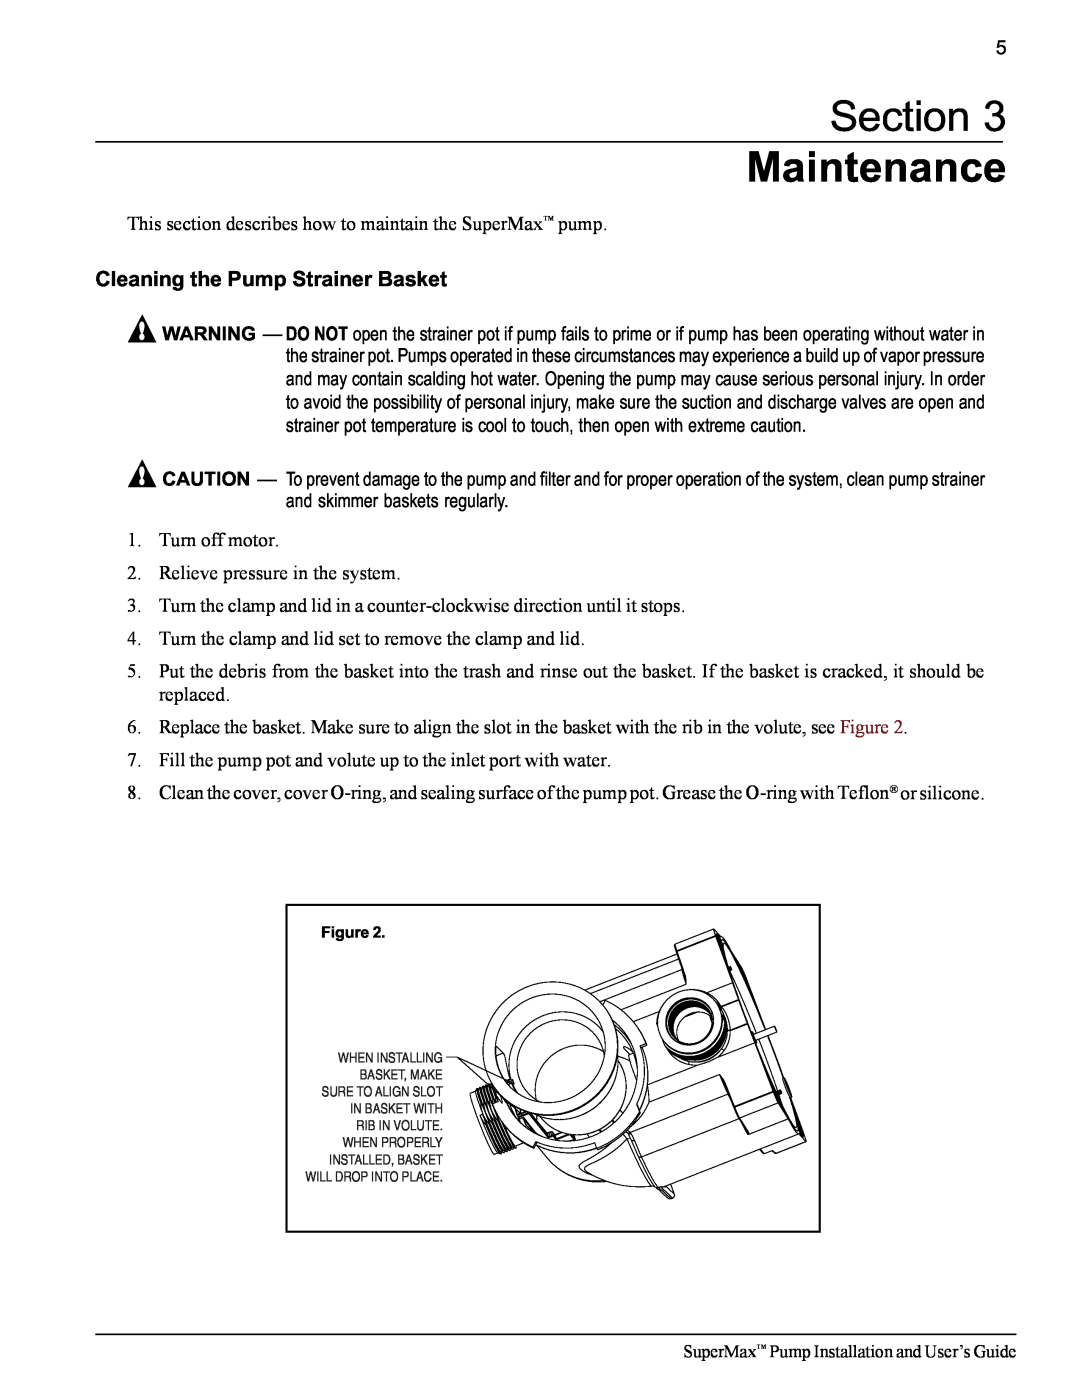 Pentair SuperMax important safety instructions Section Maintenance, Cleaning the Pump Strainer Basket 